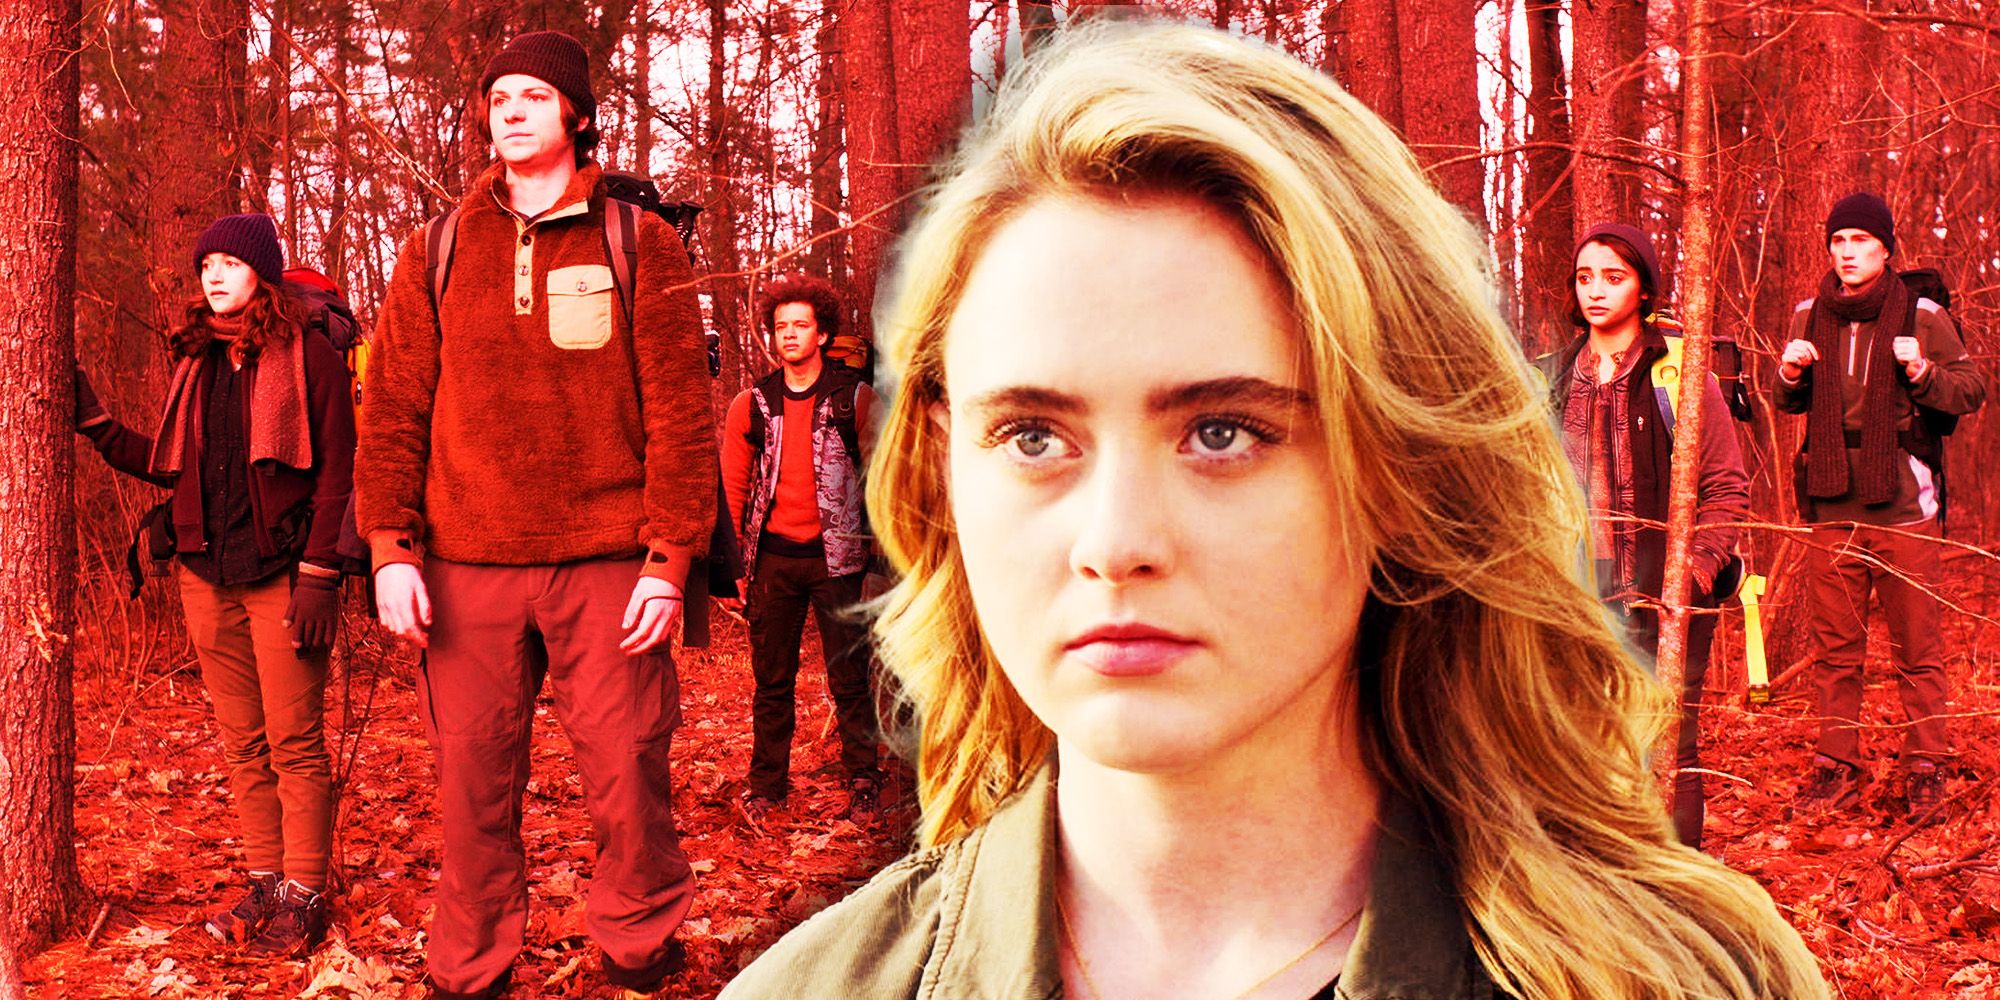 Closeup of Allie from the Society with characters from the show in the background.